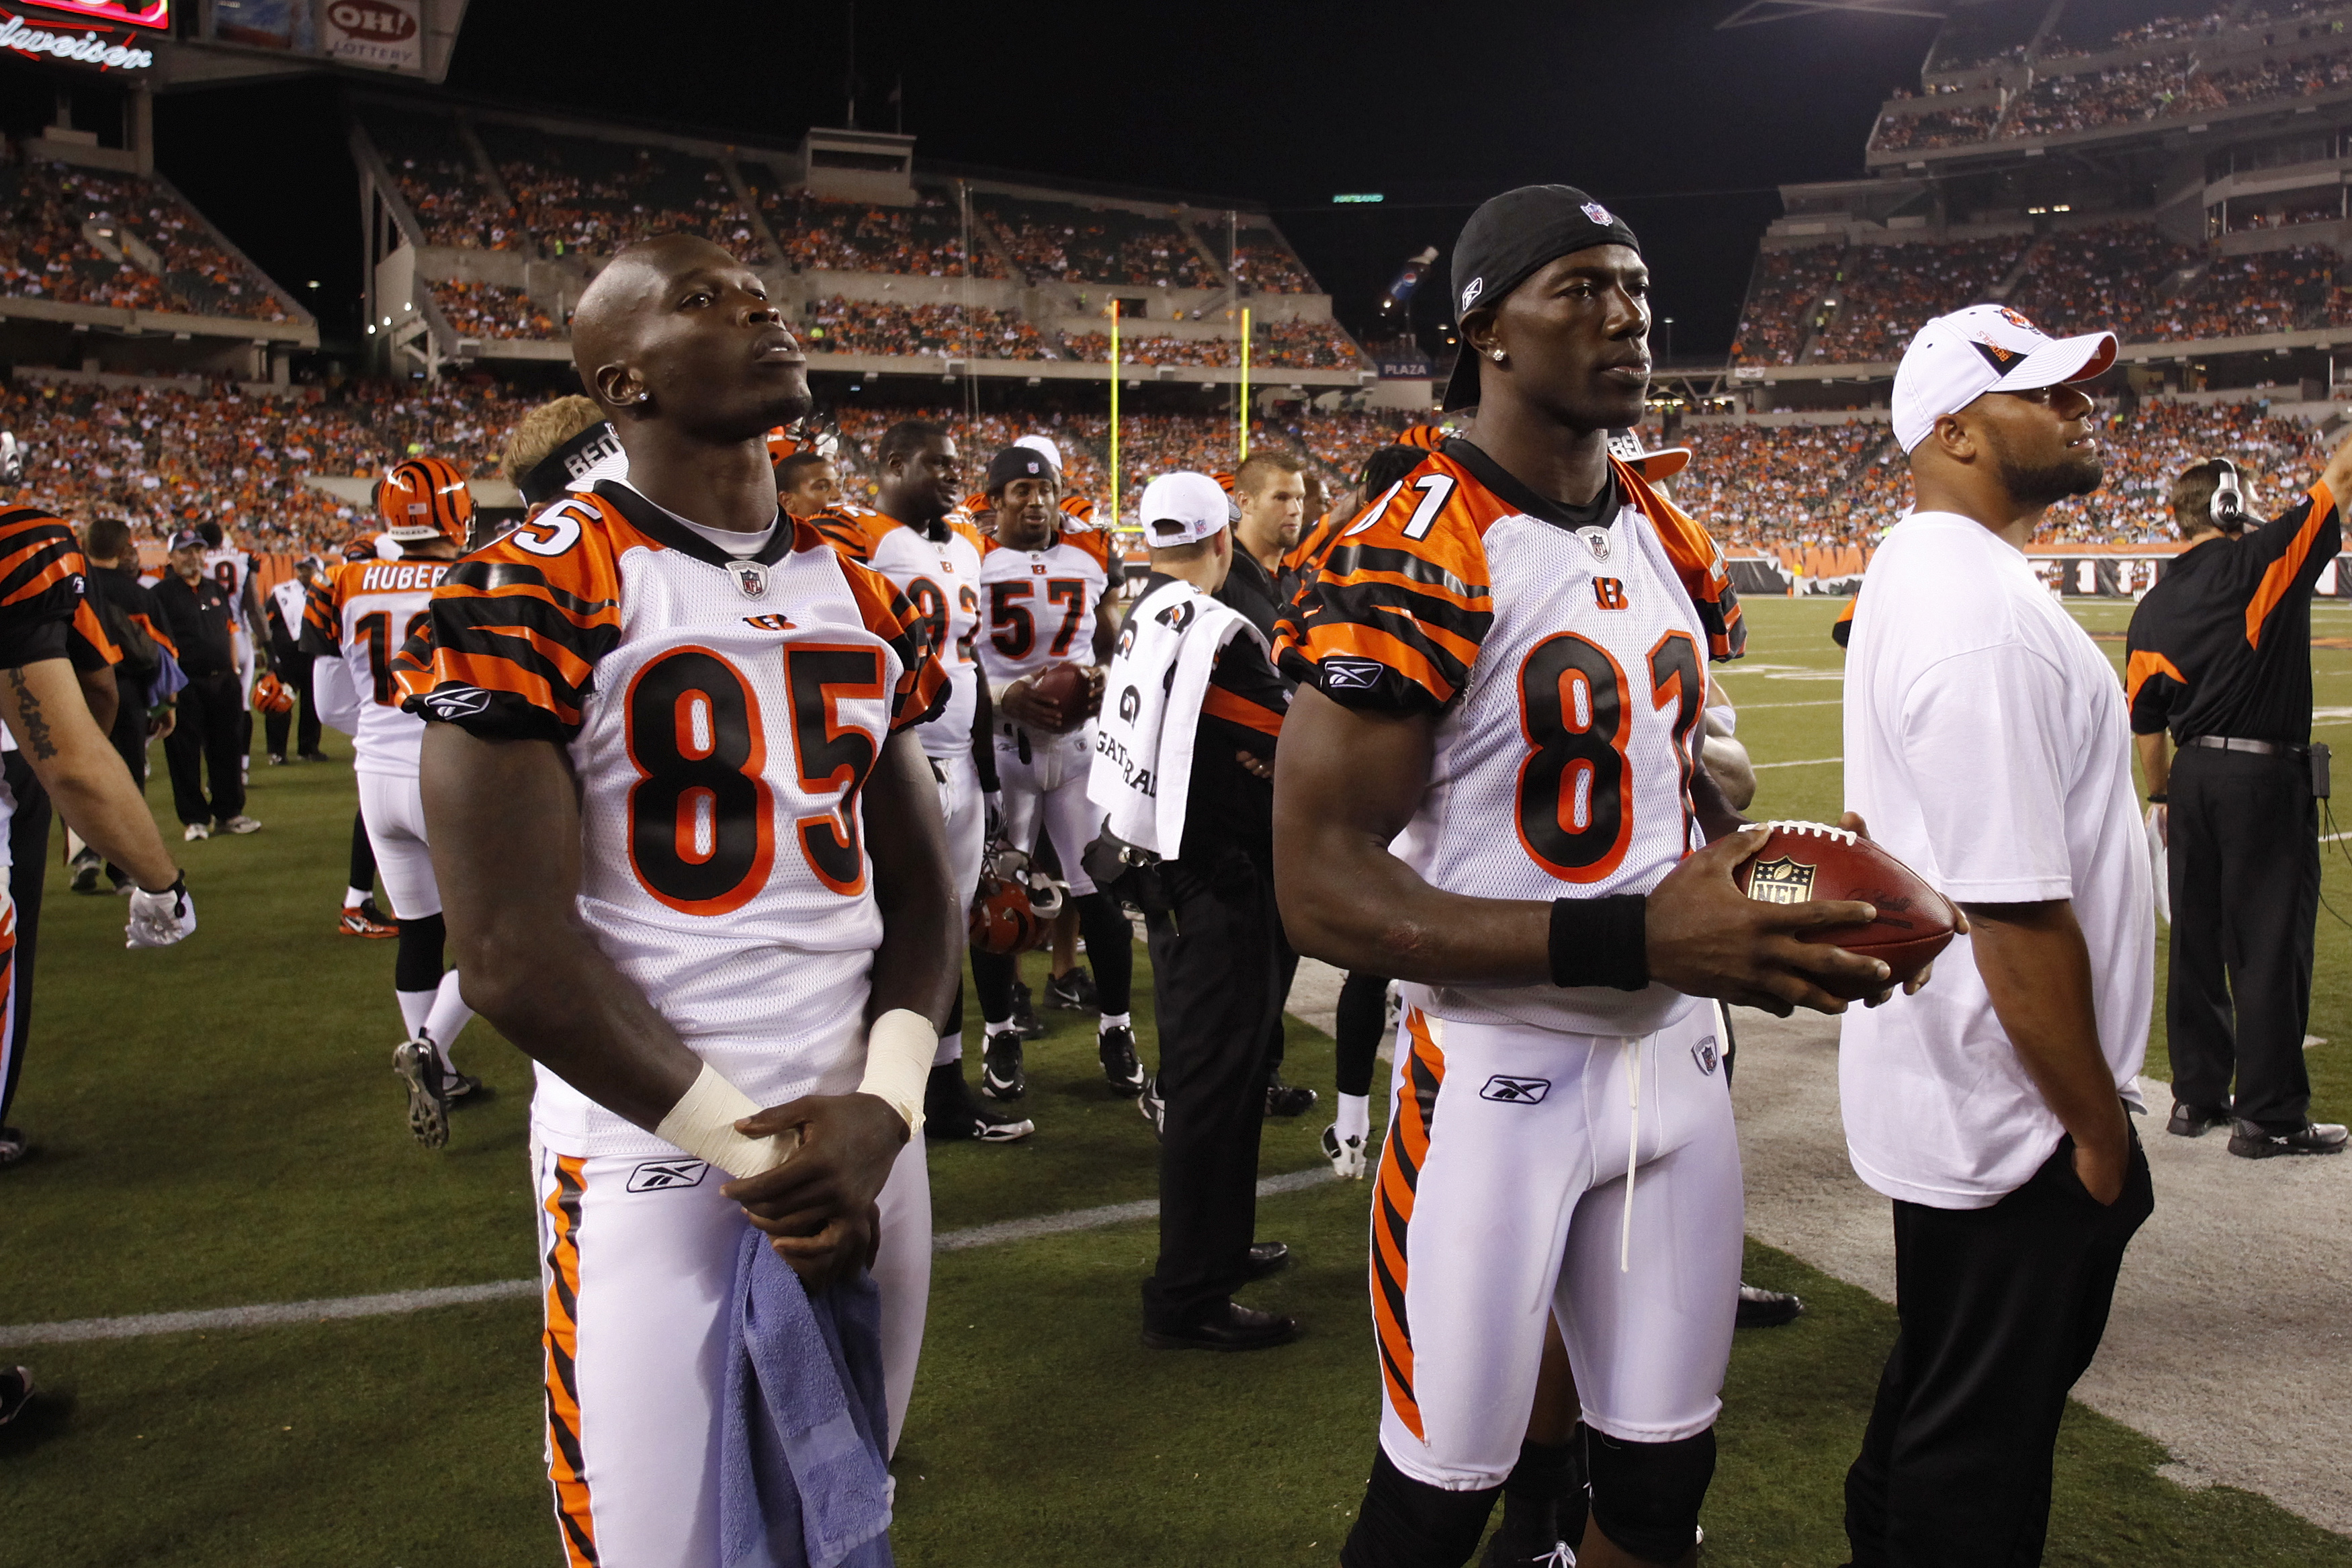 Chad Ochocinco says he almost beat up Ray Lewis after Bengals-Ravens